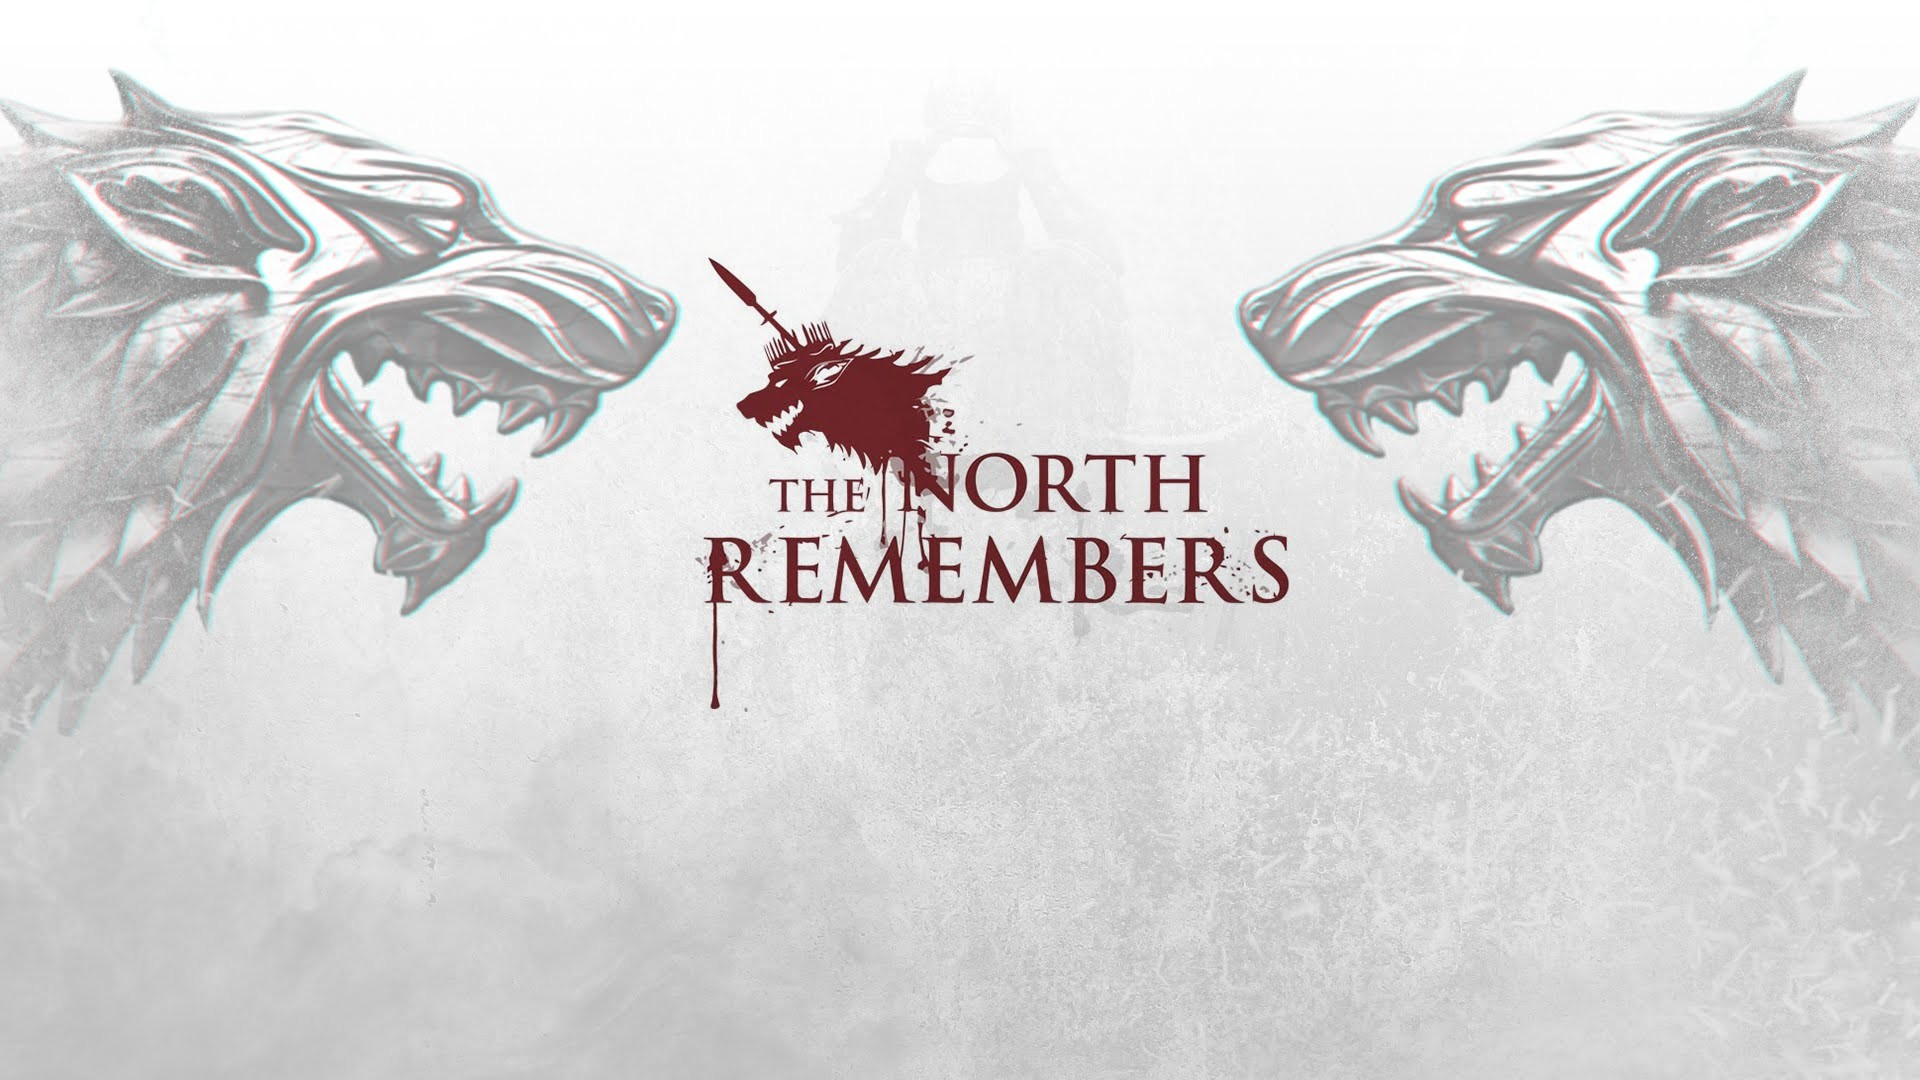 1920x1080 Free download The North Remembers Wallpaper 73 images [] for your Desktop, Mobile \u0026 Tablet | Explore 29+ Game Of Thrones The North Remembers Wallpaper HD | Game Of Thrones The North